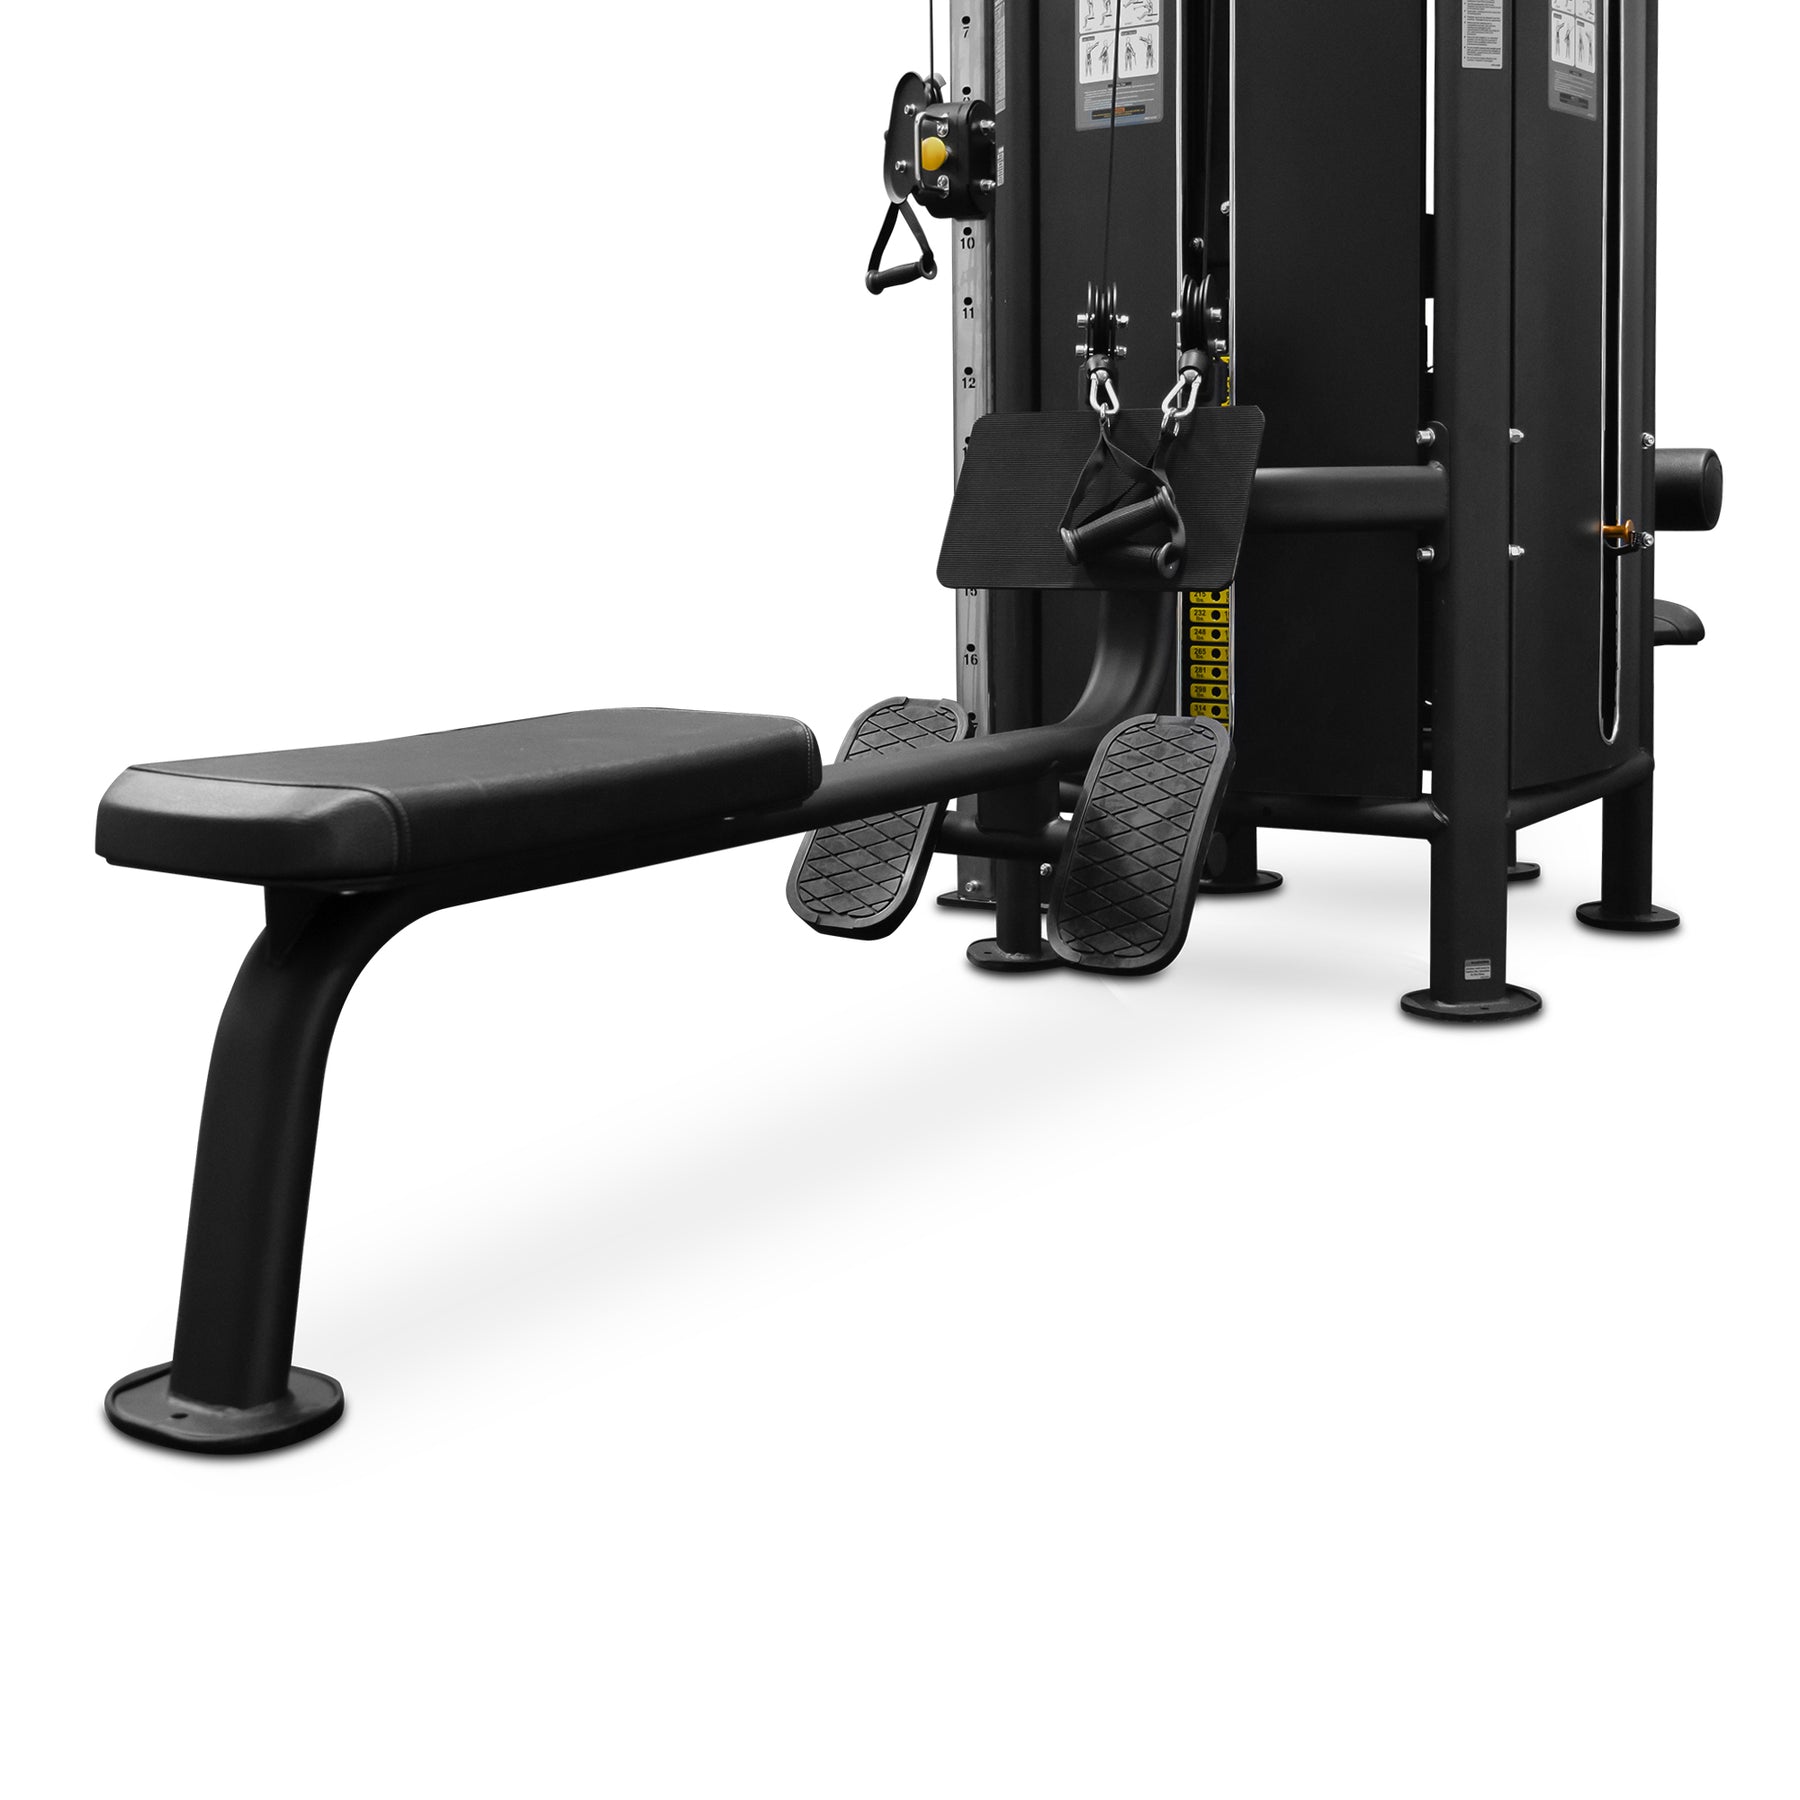 seated row - Reeplex 4 Station Commercial Multi-Gym with 150kg Weight Stacks